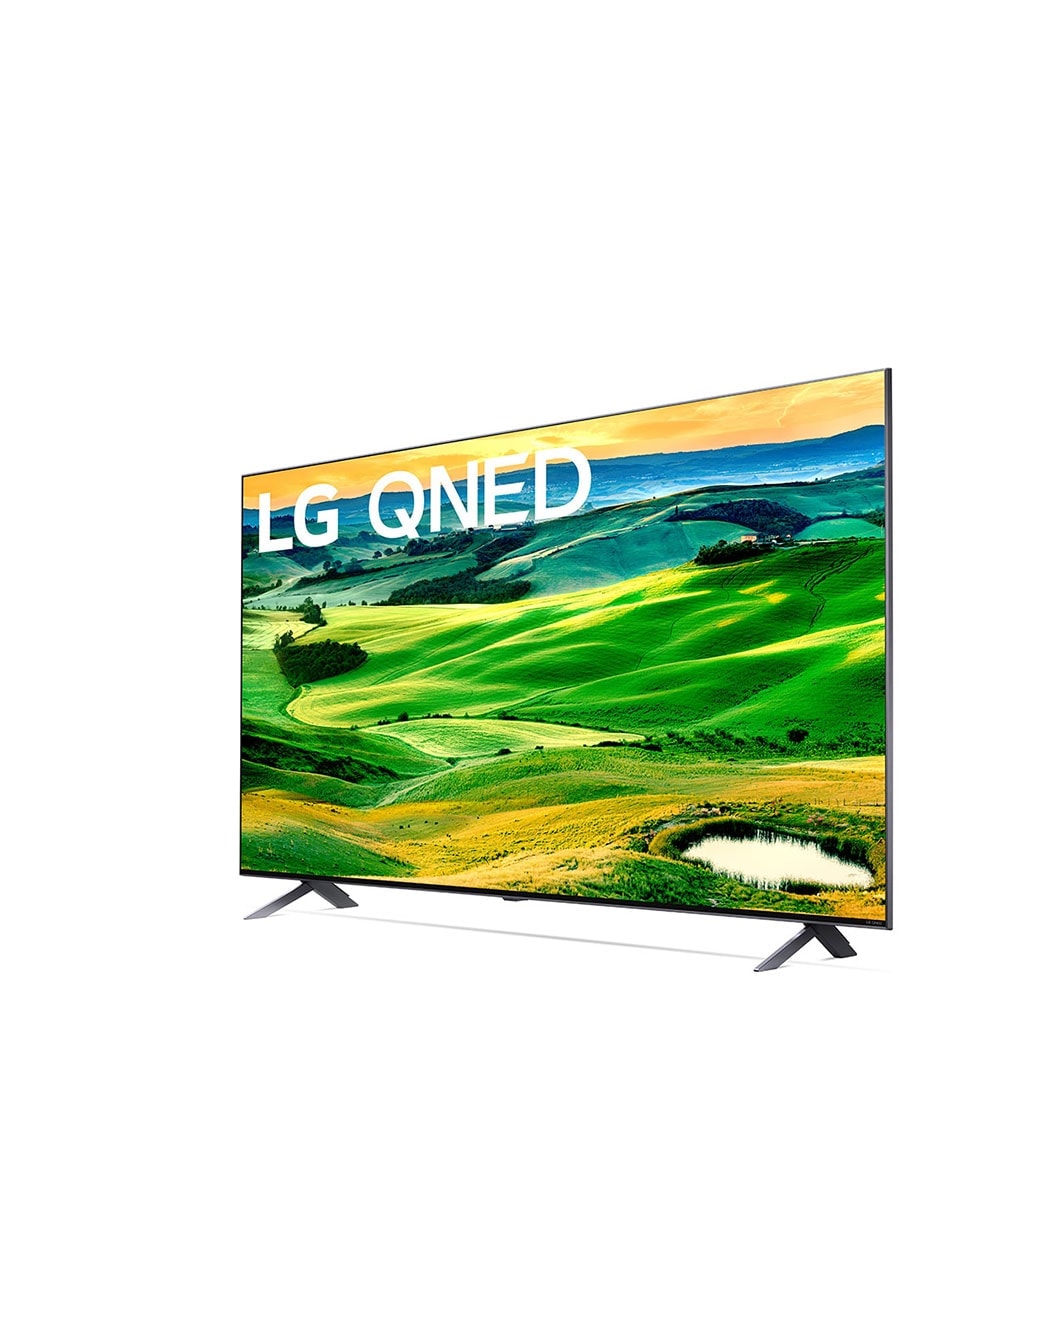 LG QNED80 55 inch 4K Smart QNED TV | LG New Zealand